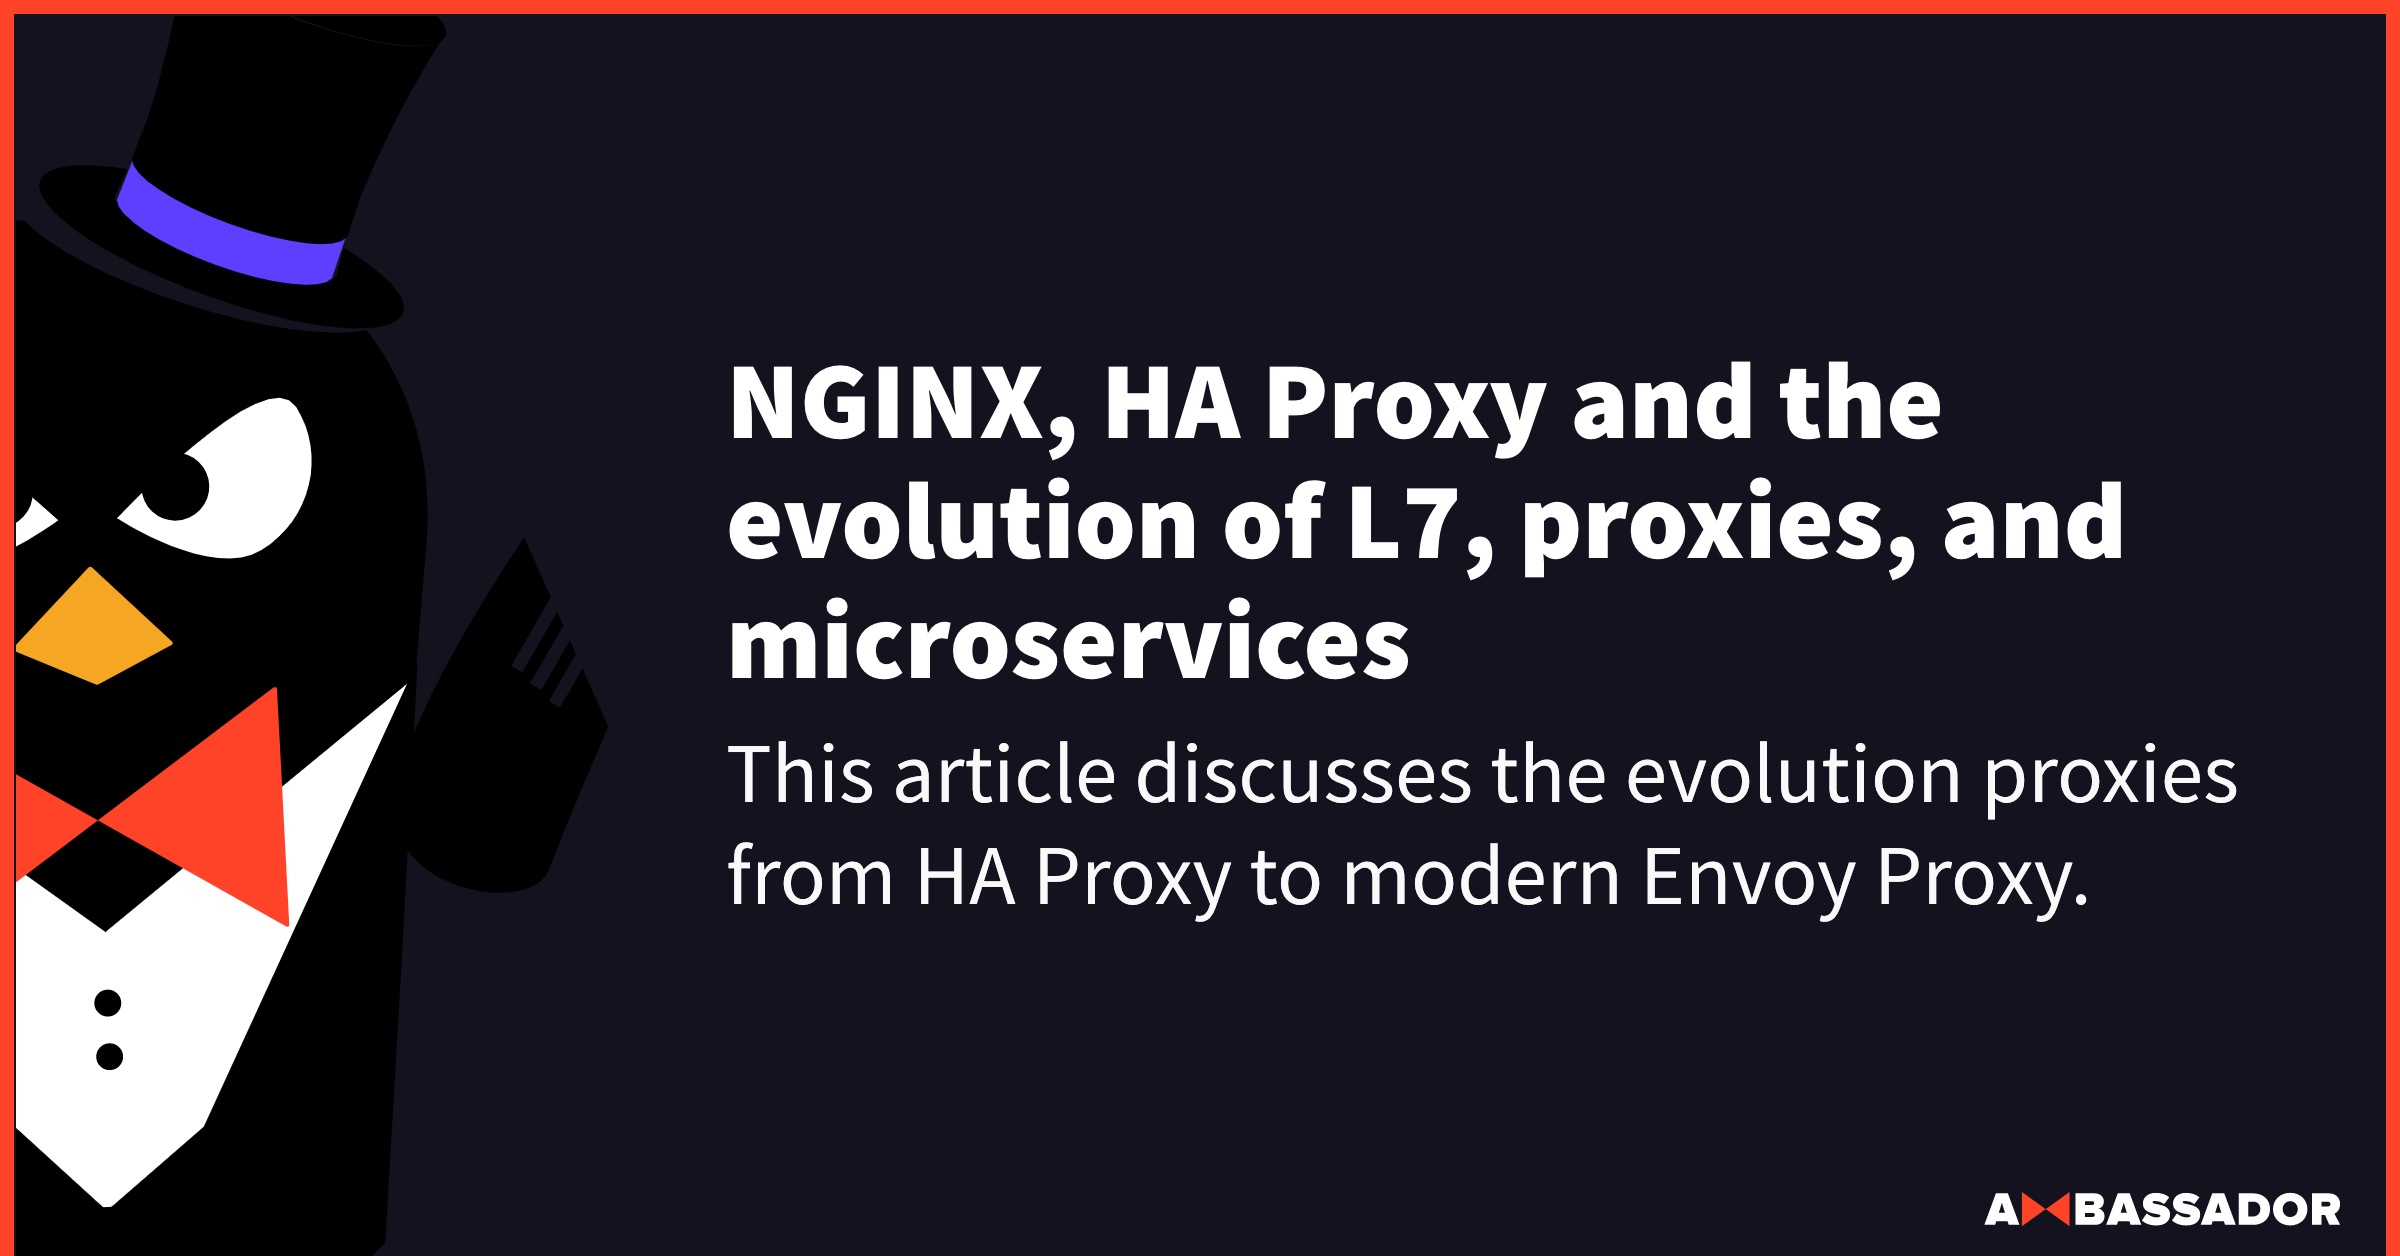 Thumbnail for resource: "NGINX, HA Proxy and the evolution of L7, proxies, and microservices"